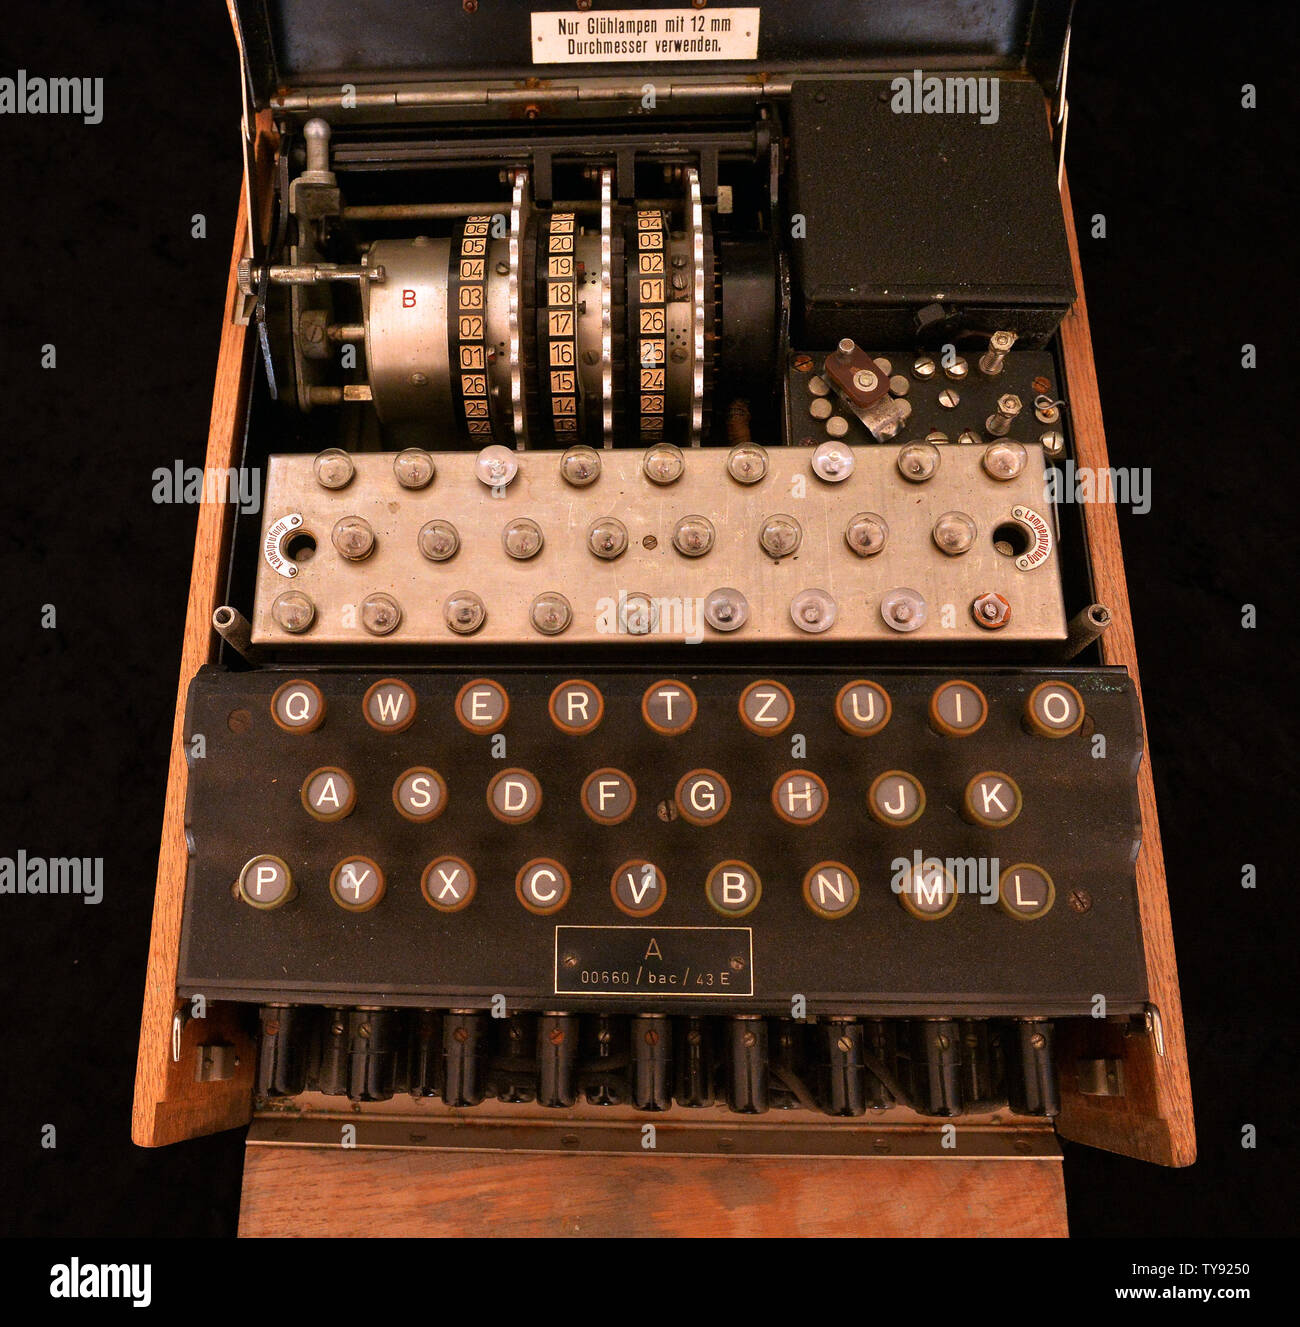 A rare three-cipher rotor design Enigma machine (M3) used by the Germans  during World War II (pictured) will be auctioned online on May 30, 2019.  Germany used the Enigma machine from 1934